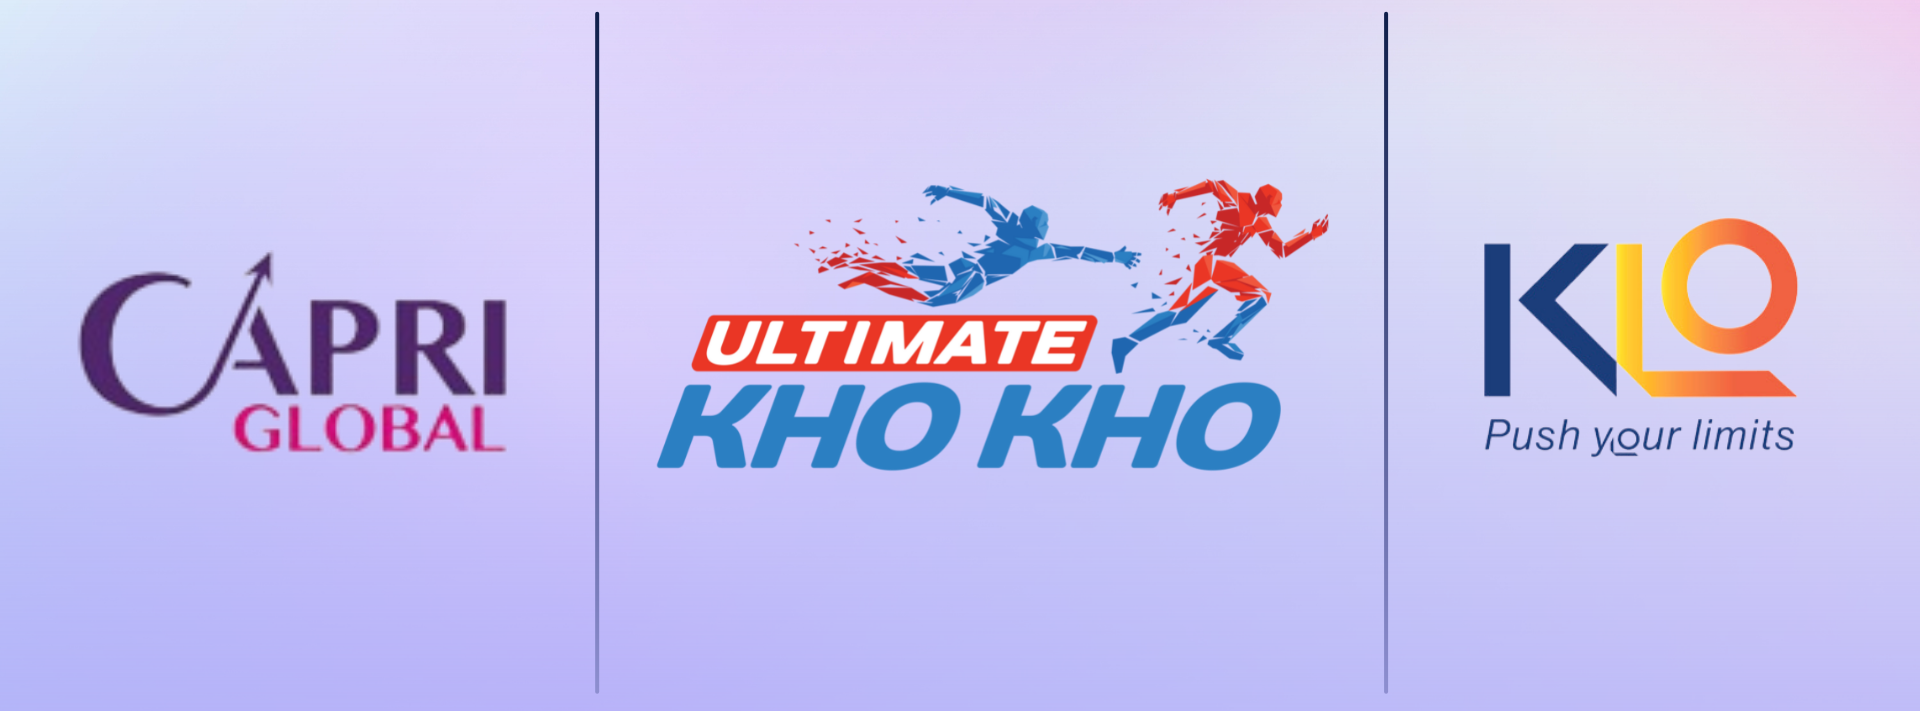 Ultimate Kho Kho on-boards Two new Franchise Owners in Capri Global and KLO  Sports